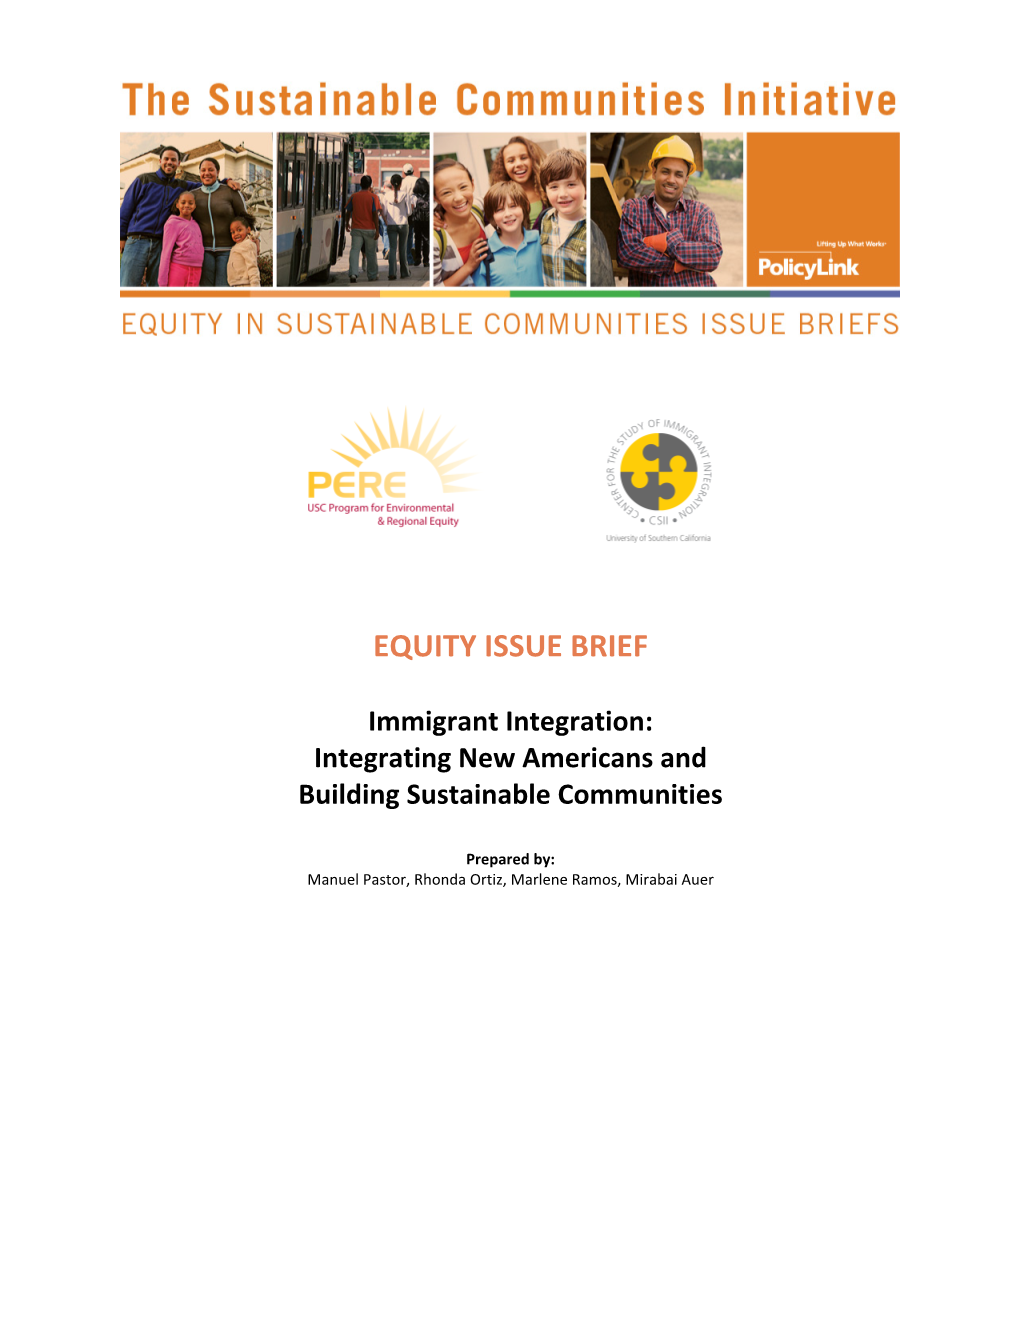 Equity Issue Brief